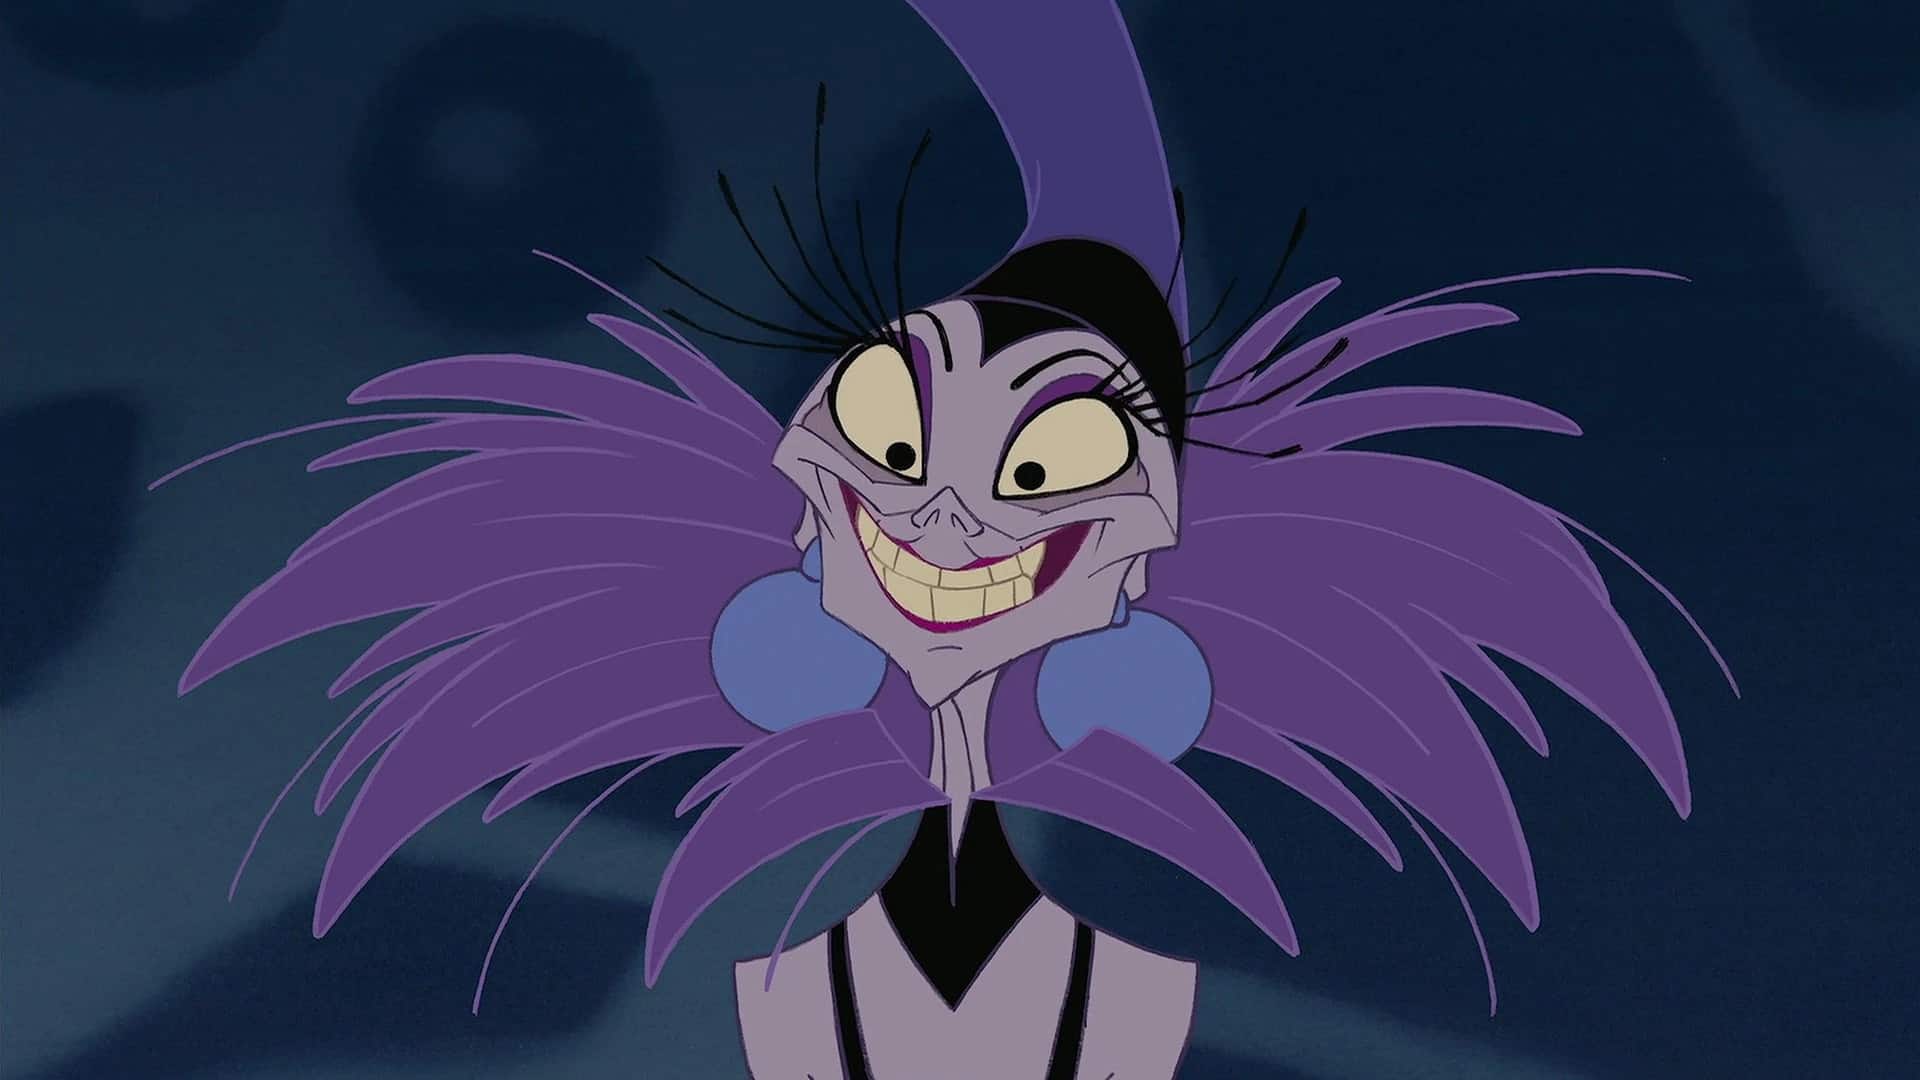 An animated woman in all purple in this image from Walt Disney Animation Studios